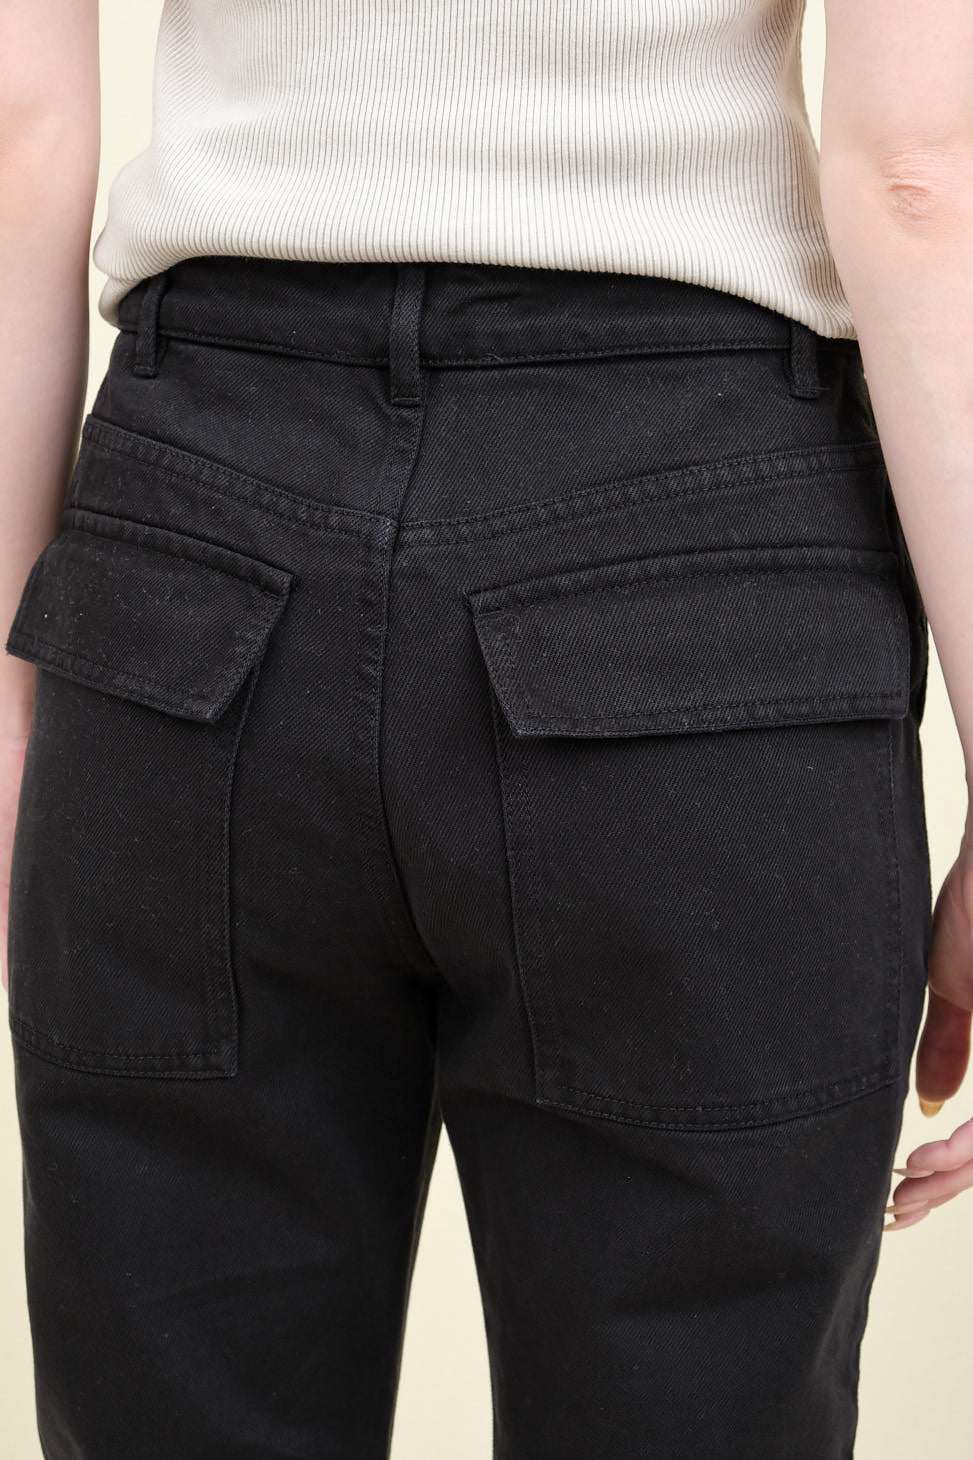 Back pockets on Panjad Cropped Trousers